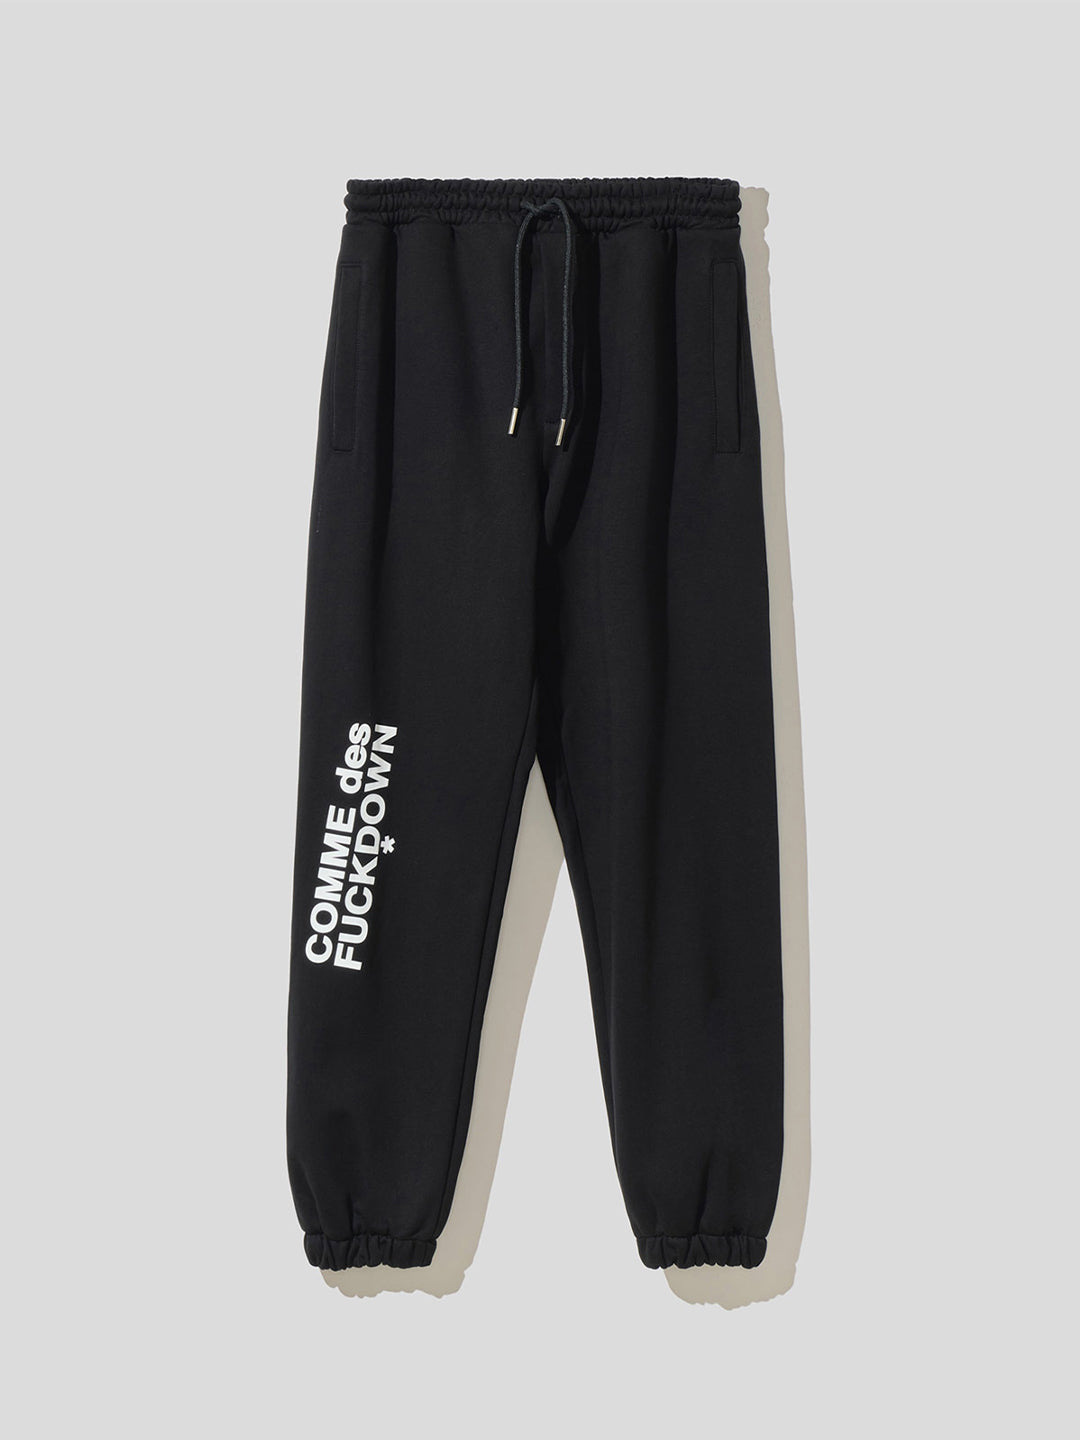 Comme des fuckdown black trousers with contrasting logo